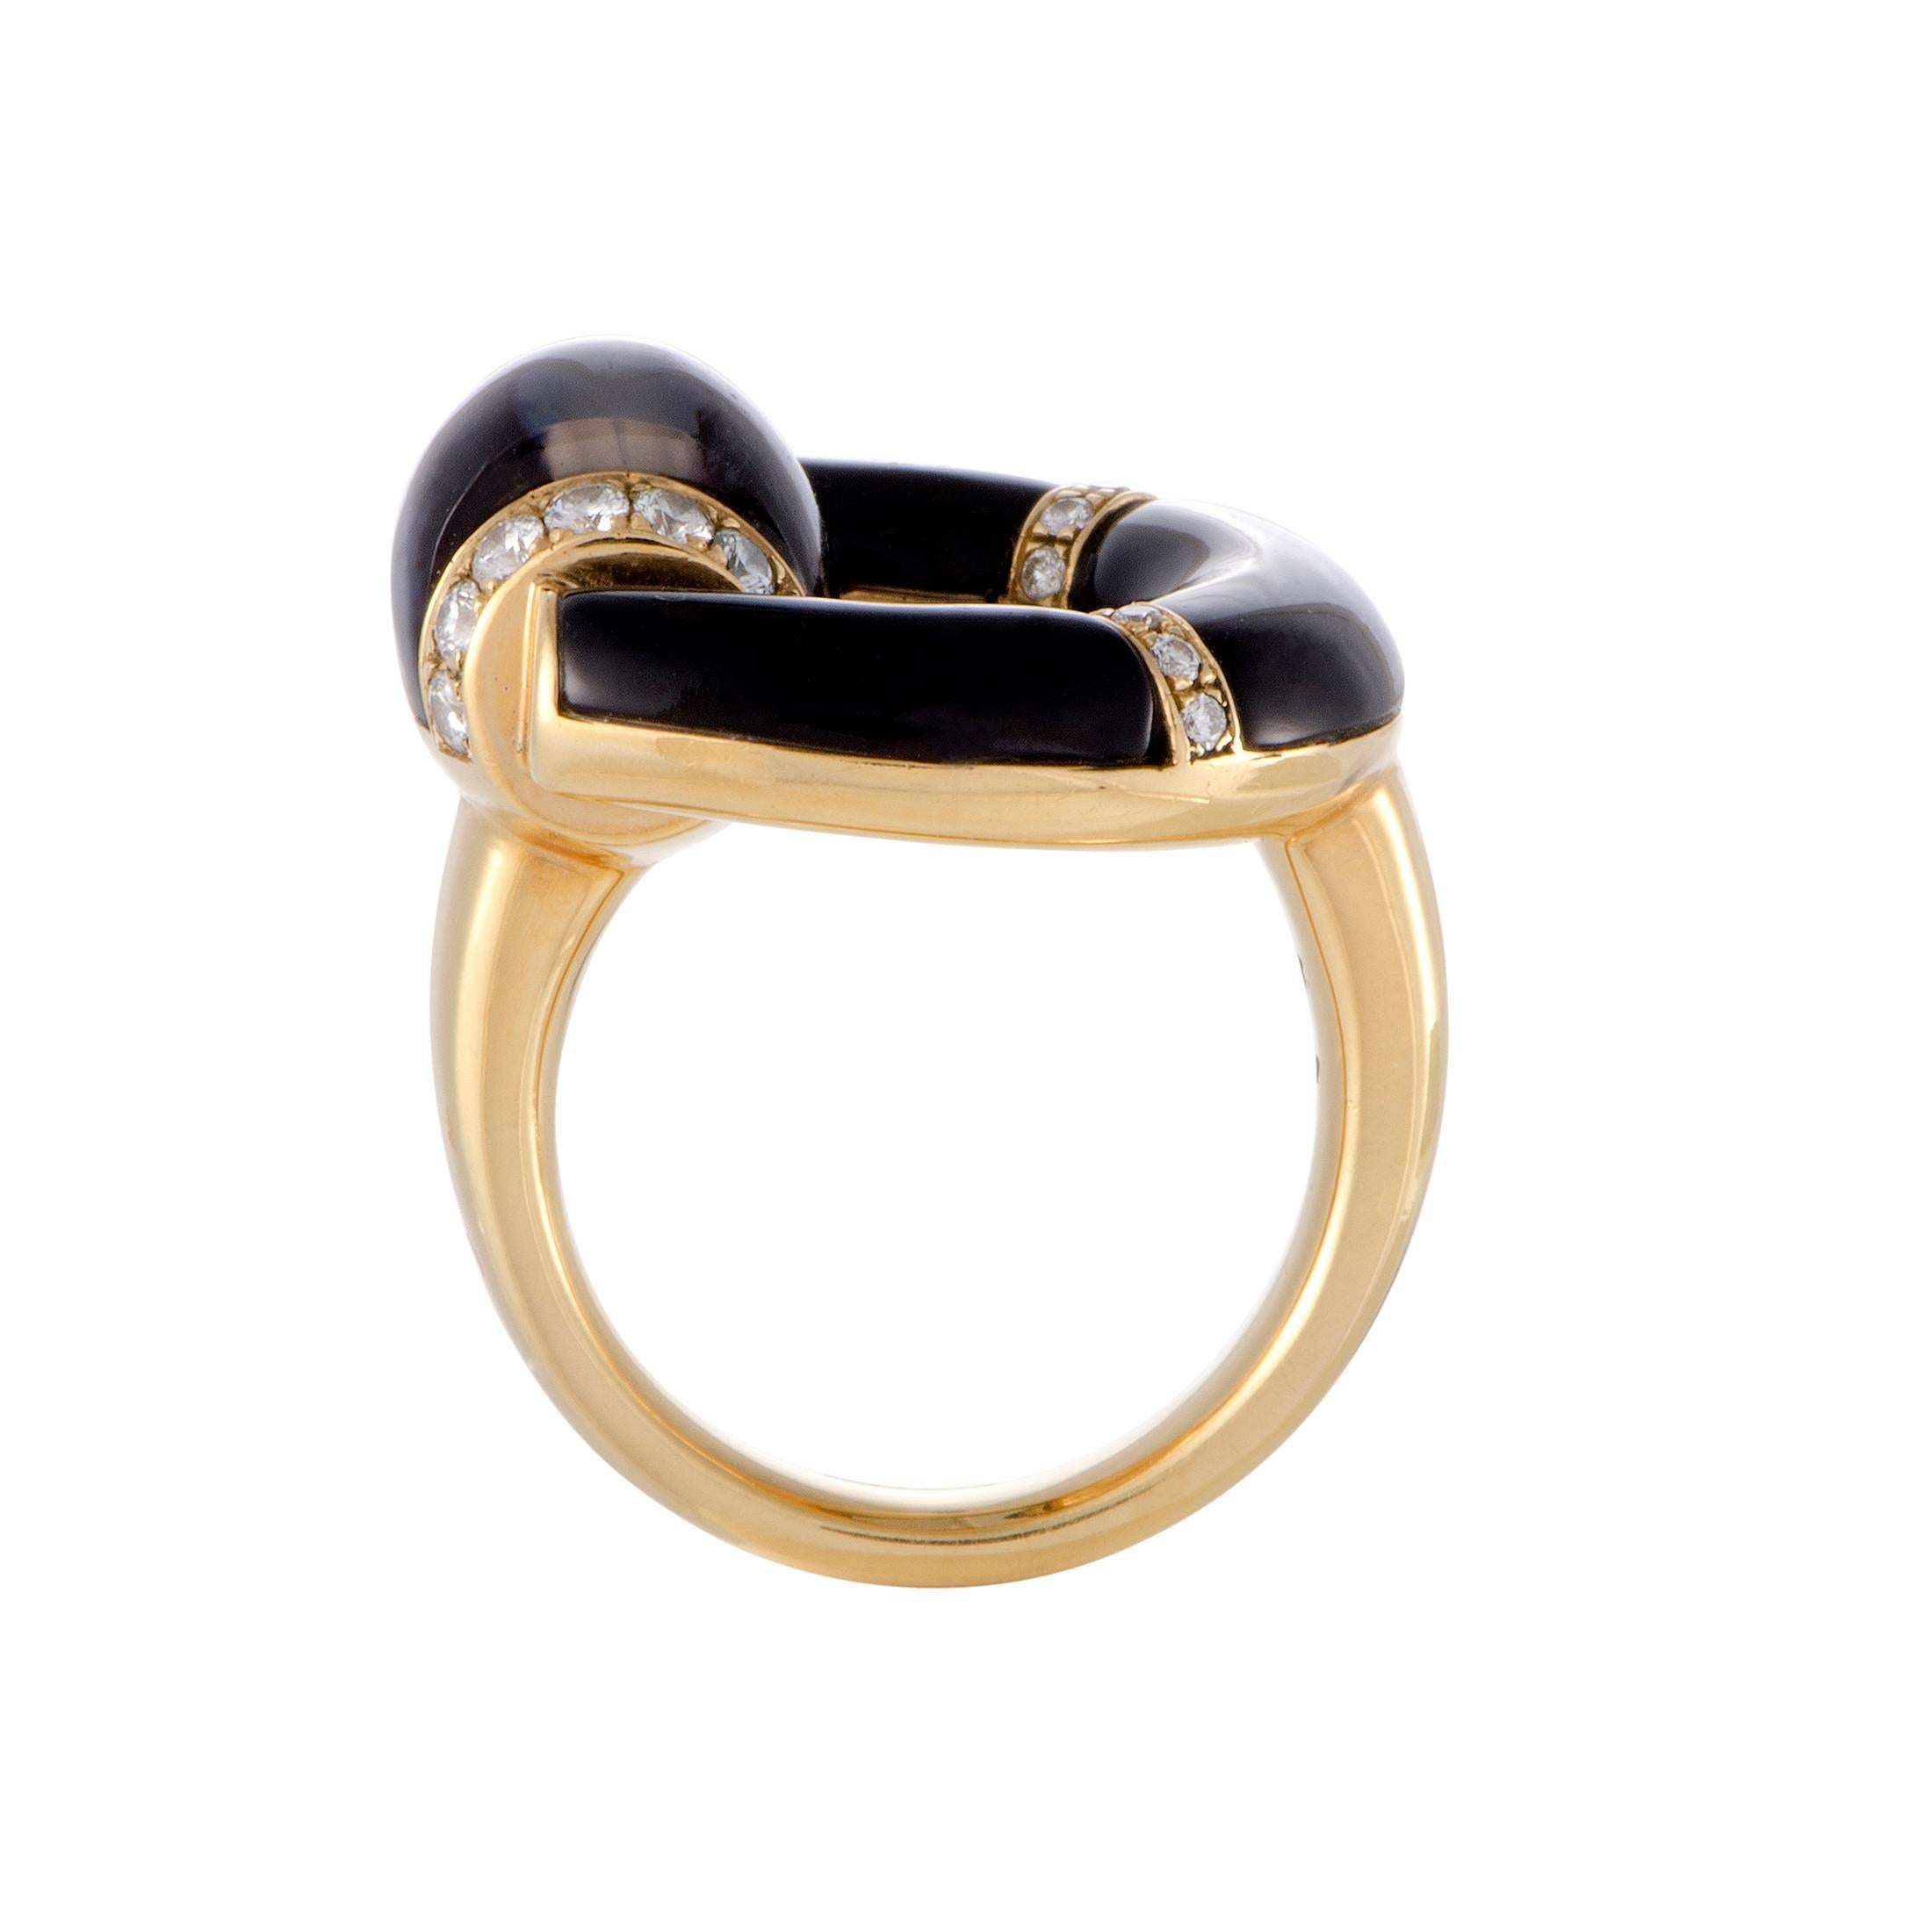 Boasting the brand’s emblematic design, this statement piece from Gucci offers a captivating look that embodies both bold, eye-catching style and neat, classy appeal. The ring is made of 18K yellow gold and set with black agate and onyx as well as